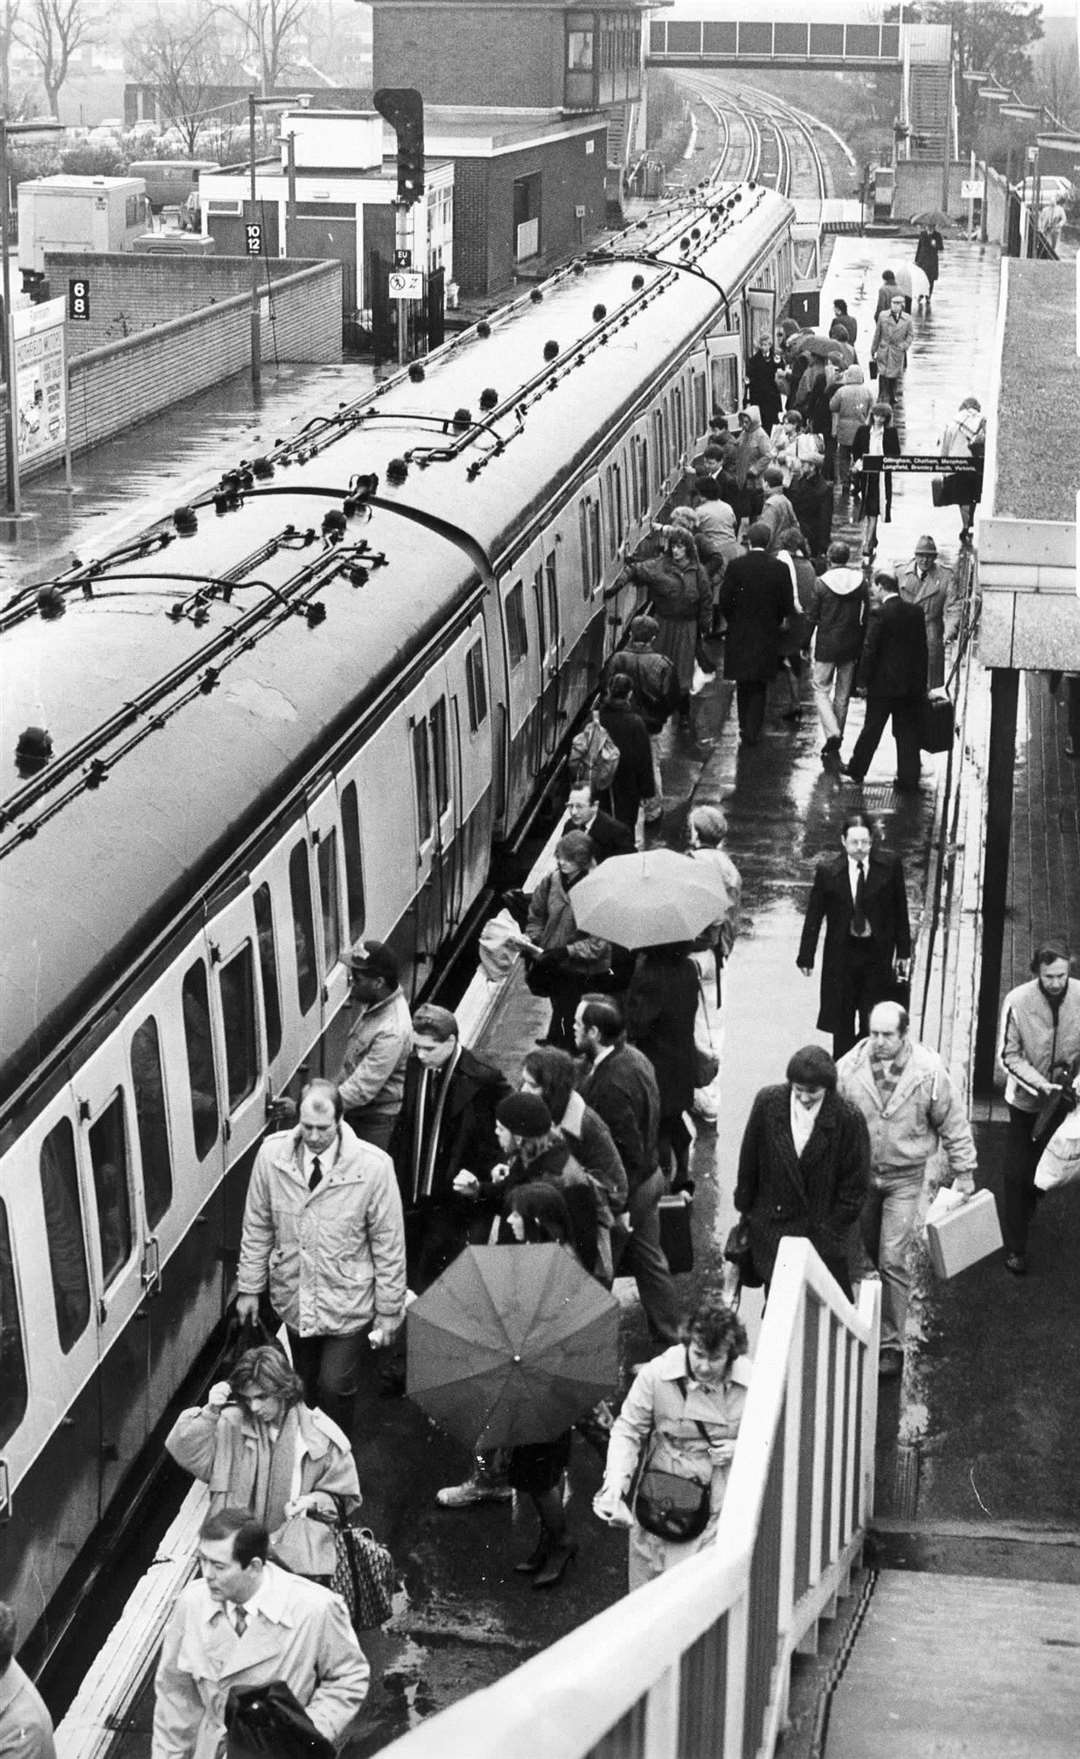 Commuters at Rainham station queue for a slow train to London at 7.45am on a wet Monday morning in March 1988